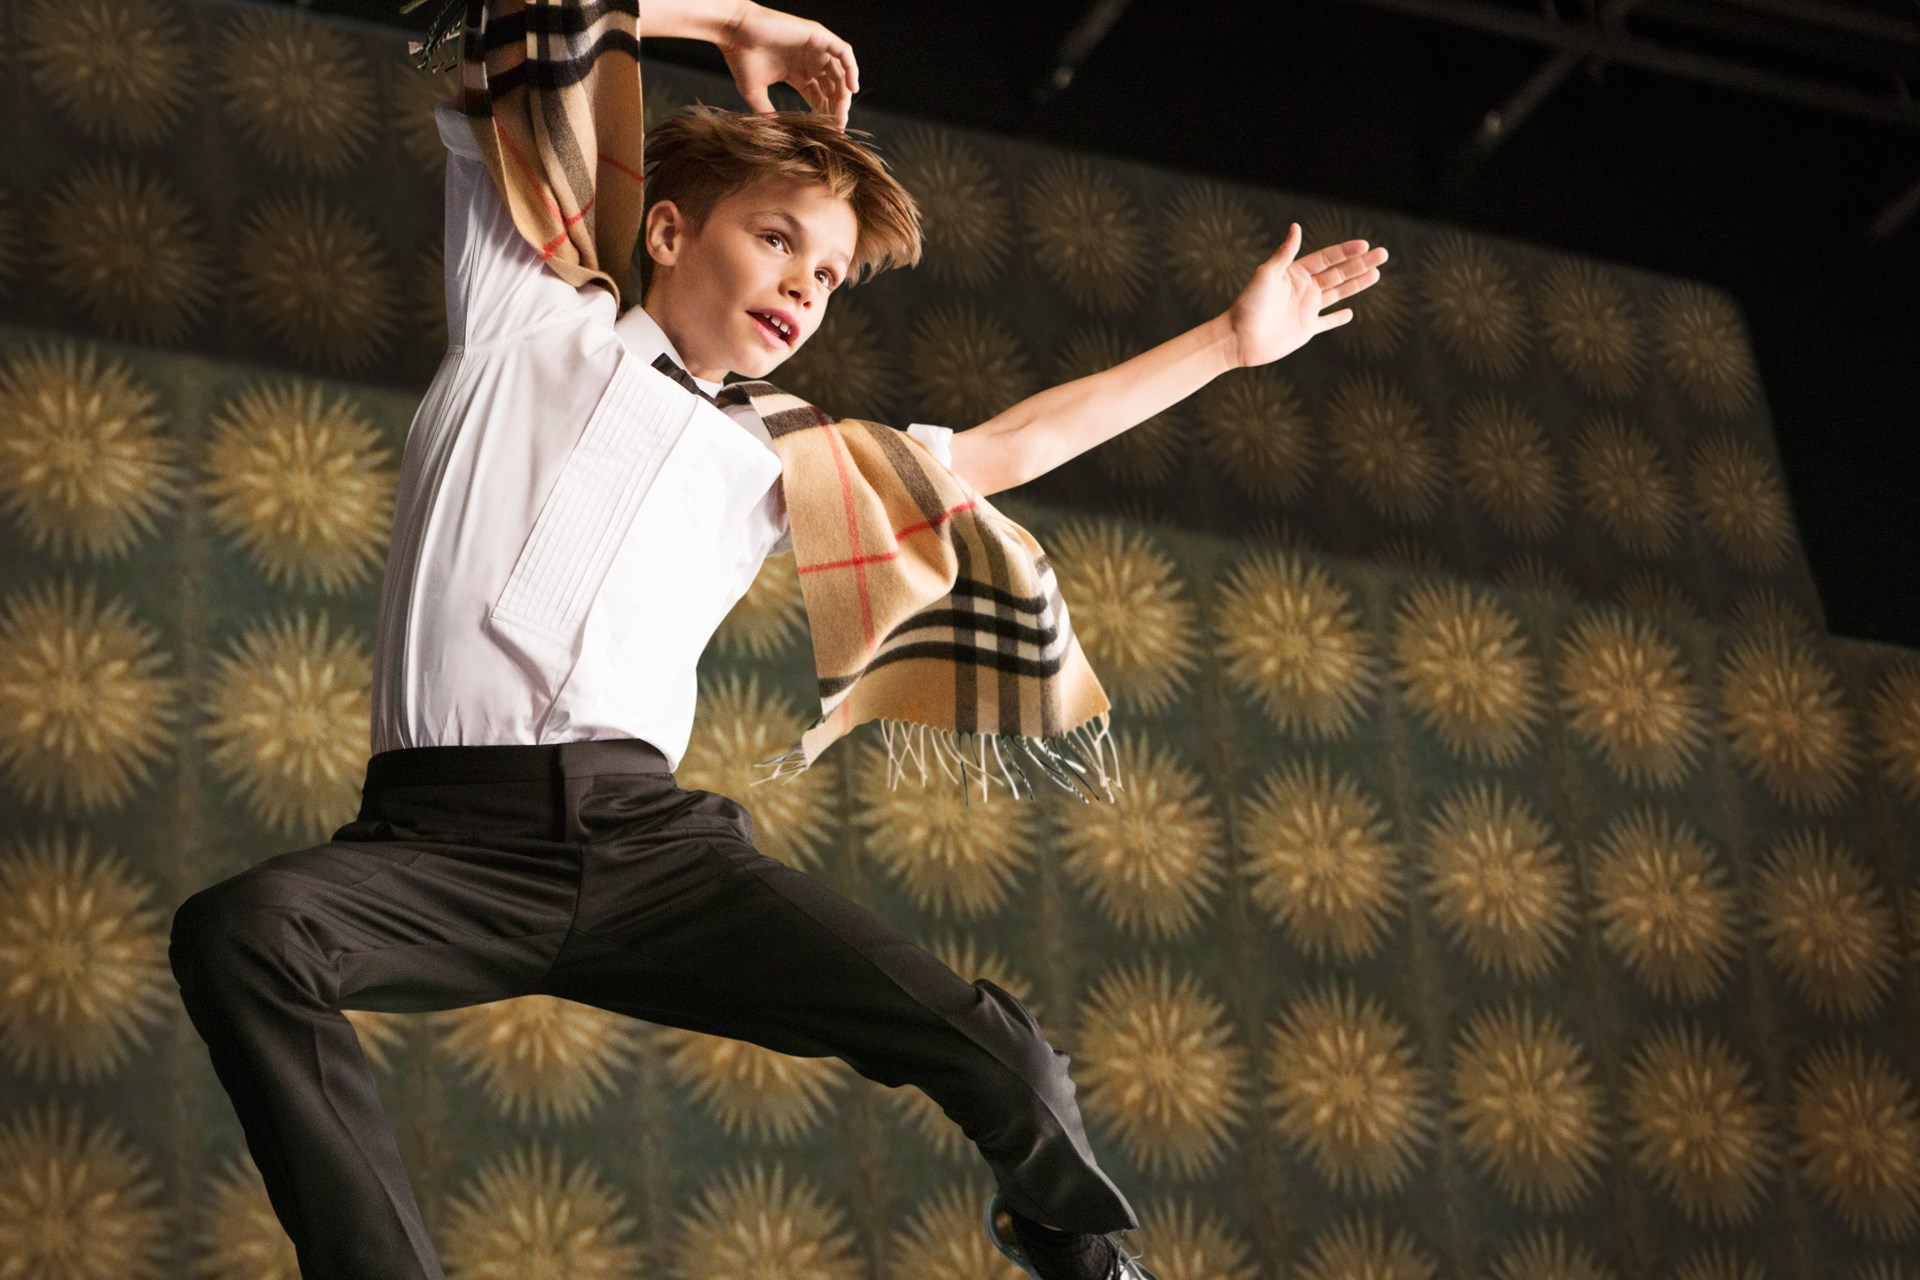 Burberry “Billy Elliot” Christmas 2015 Campaign Featuring Romeo Beckham